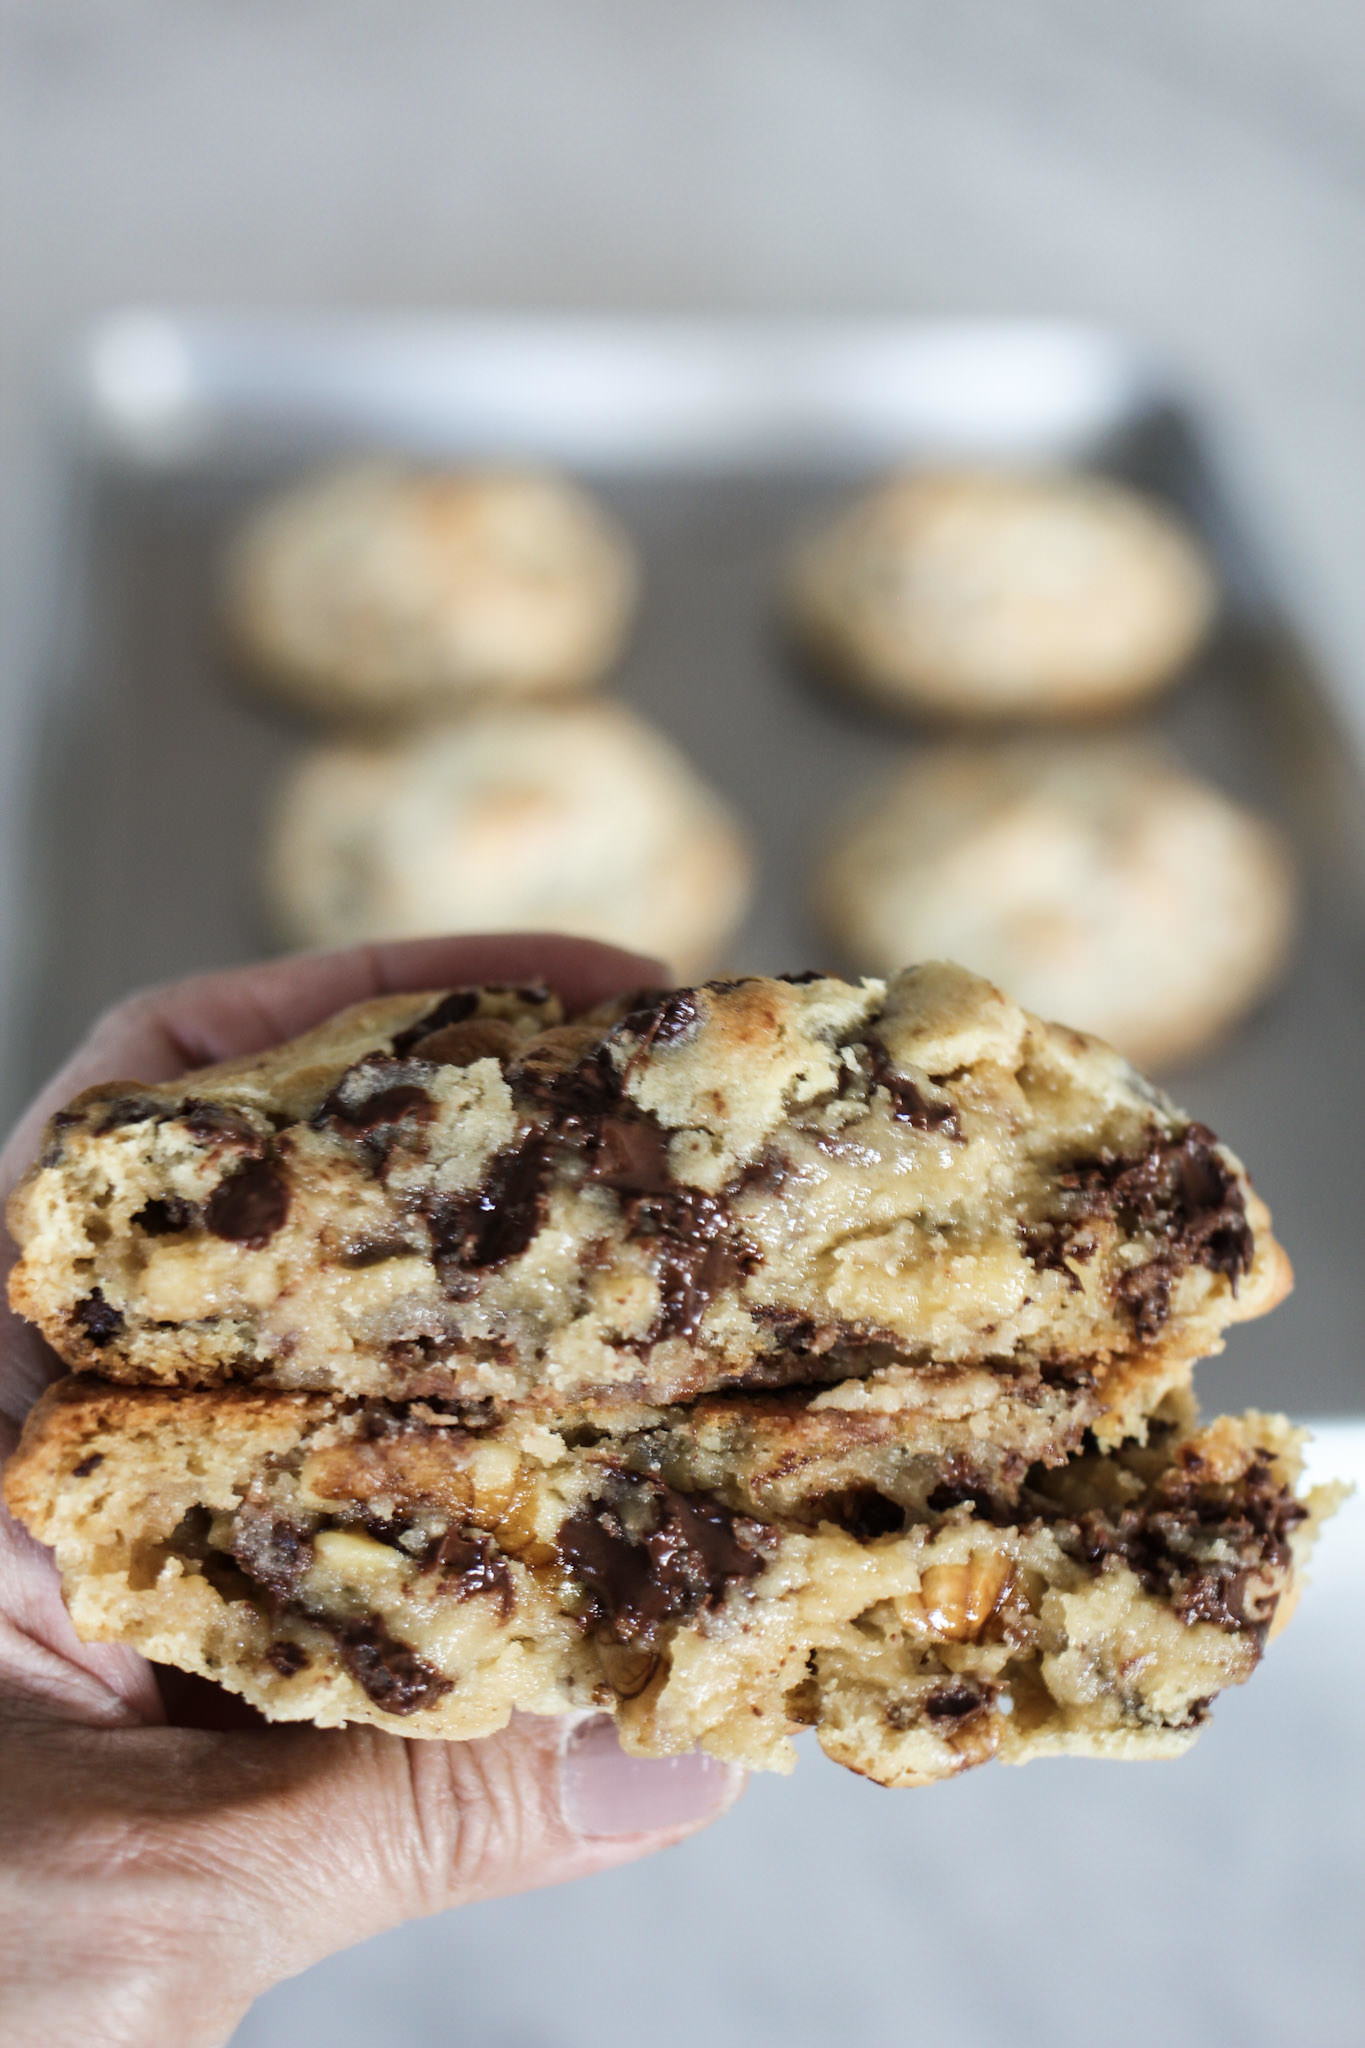 Hands holding a gooey chocolate chip walnut cookie sliced in half with a baking sheet full of cookies behind it.